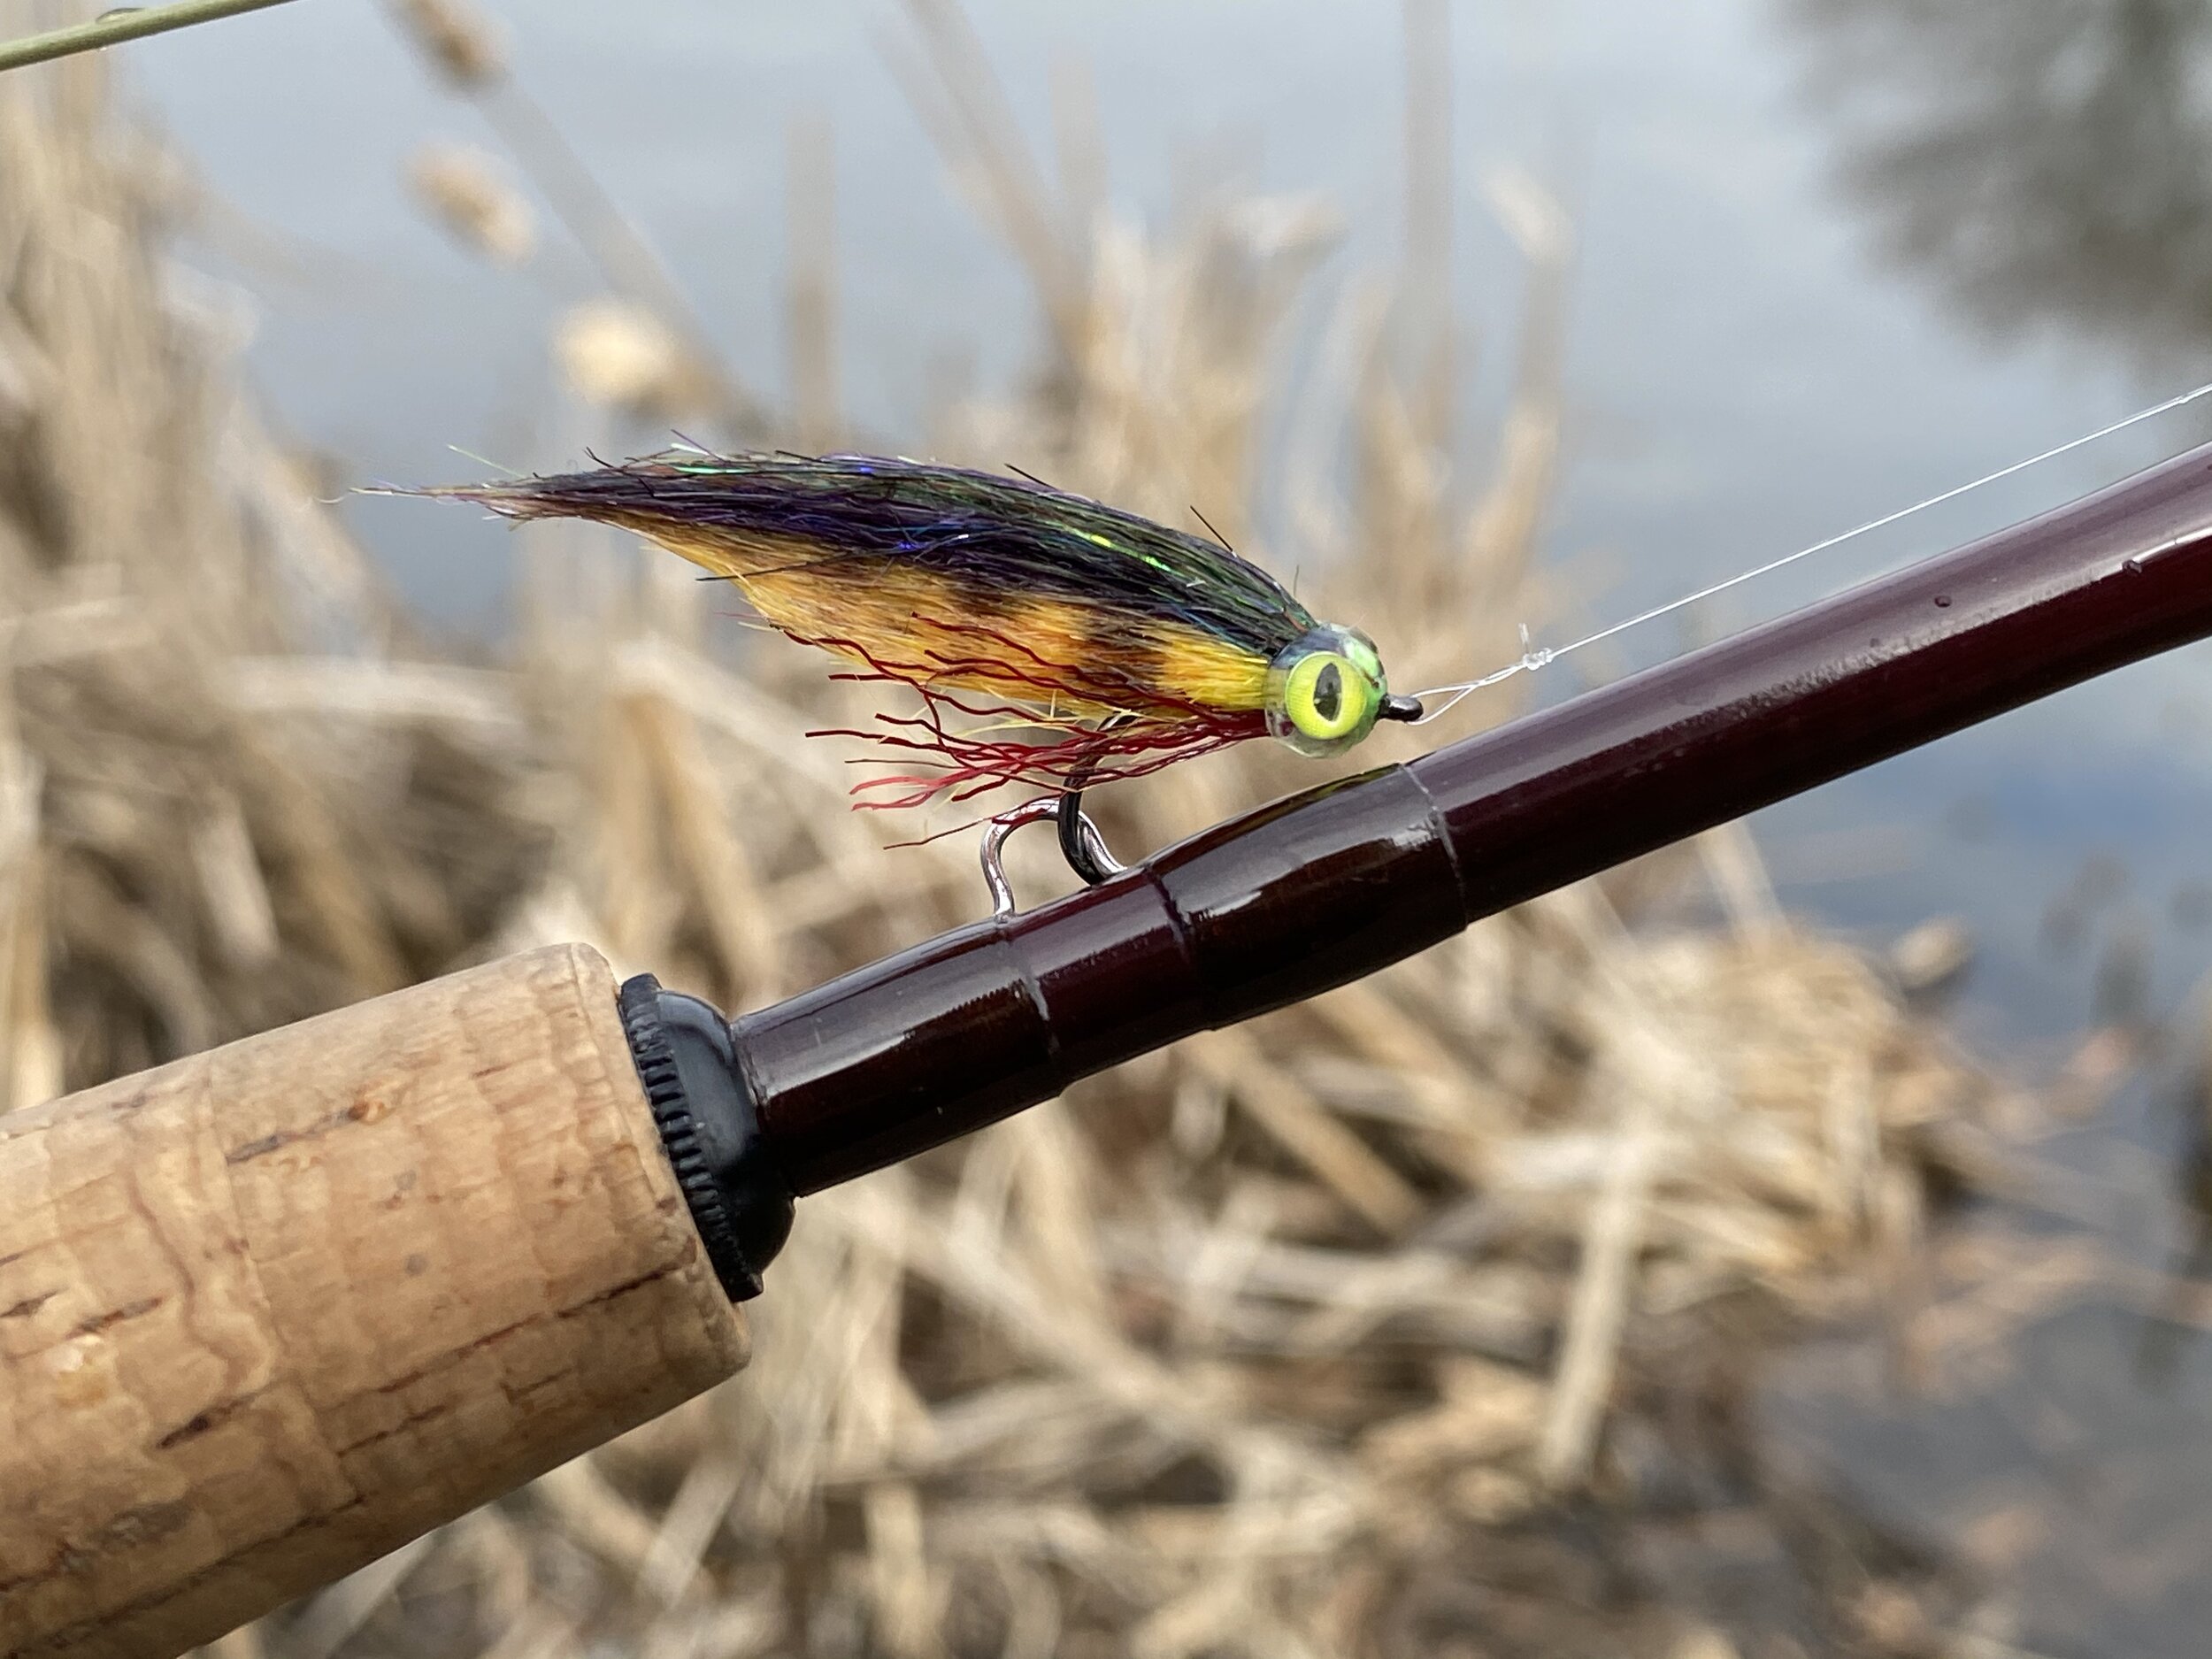 Baby Bluegill Streamers for Big Panfish! — Panfish On The Fly